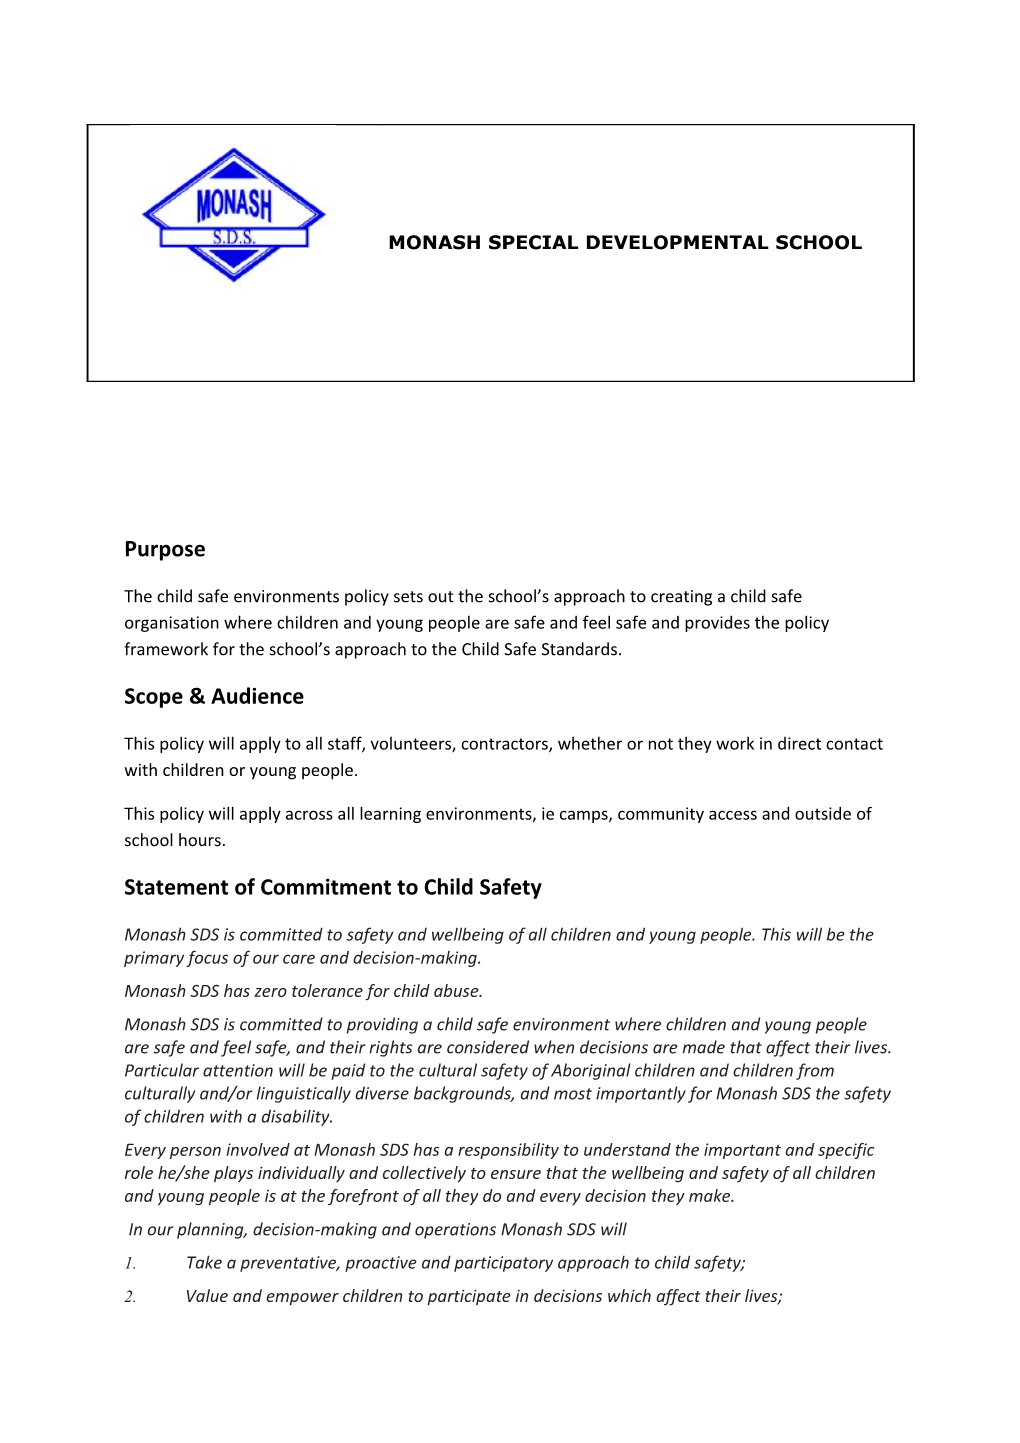 Statement of Commitment to Child Safety